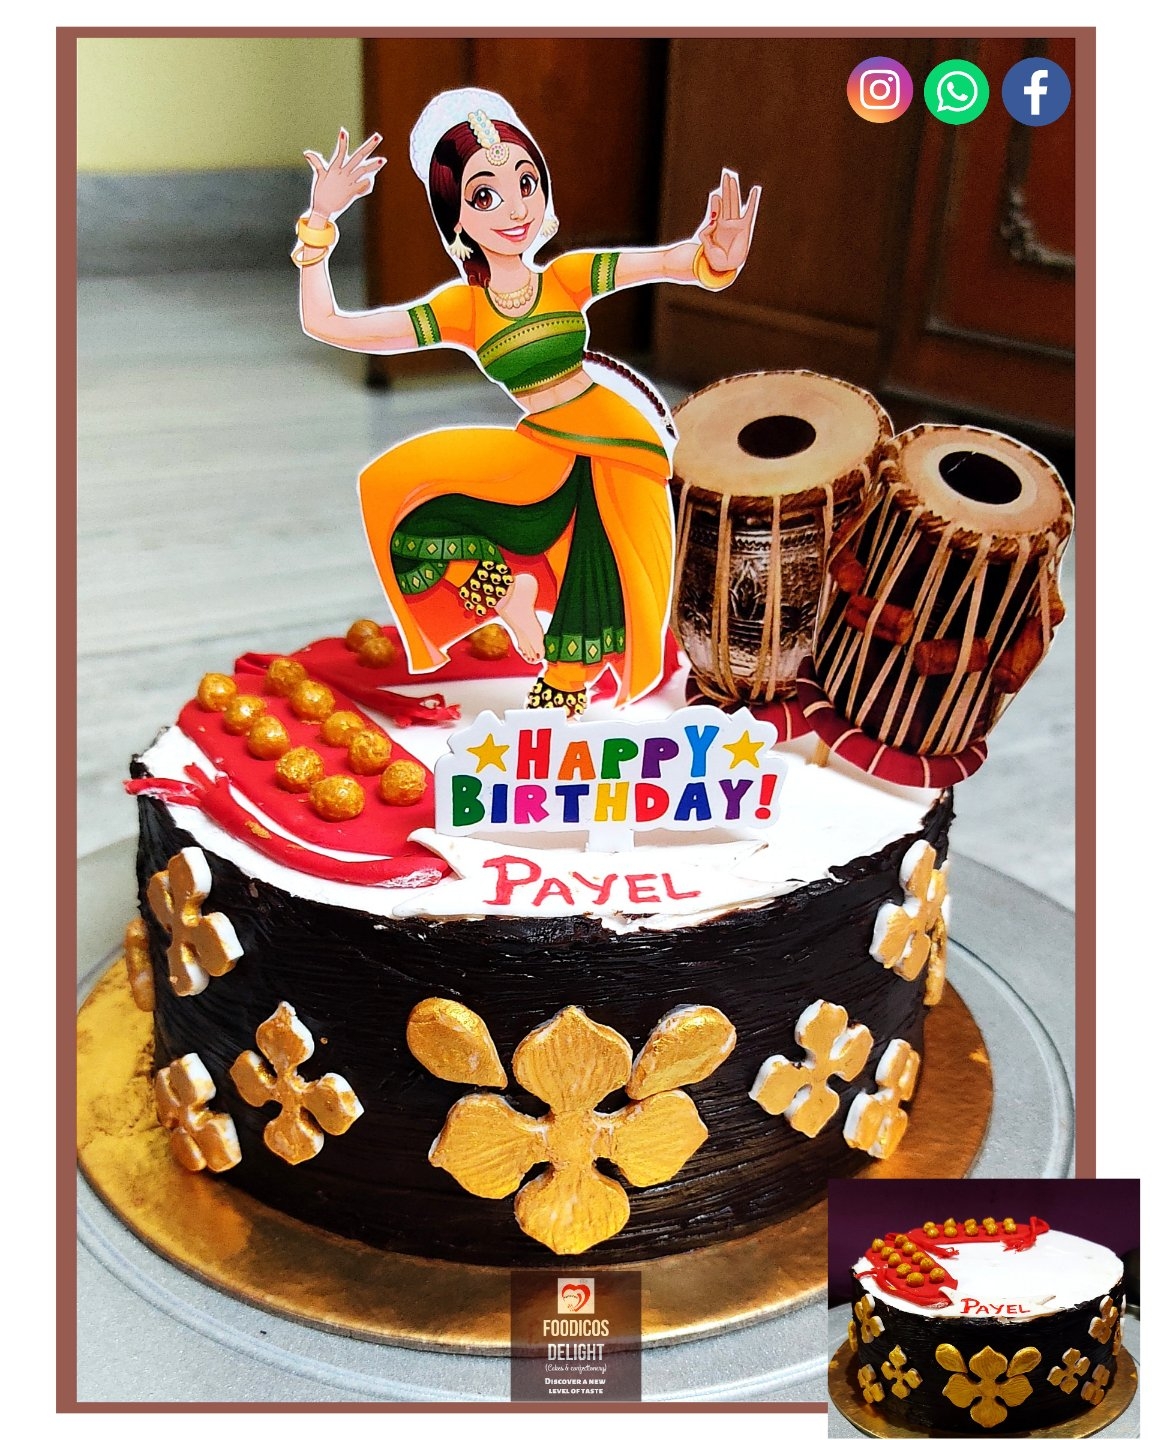 Dhol (drum) cake I made for an Indian wedding event! This came out  wonderful. : r/cakedecorating